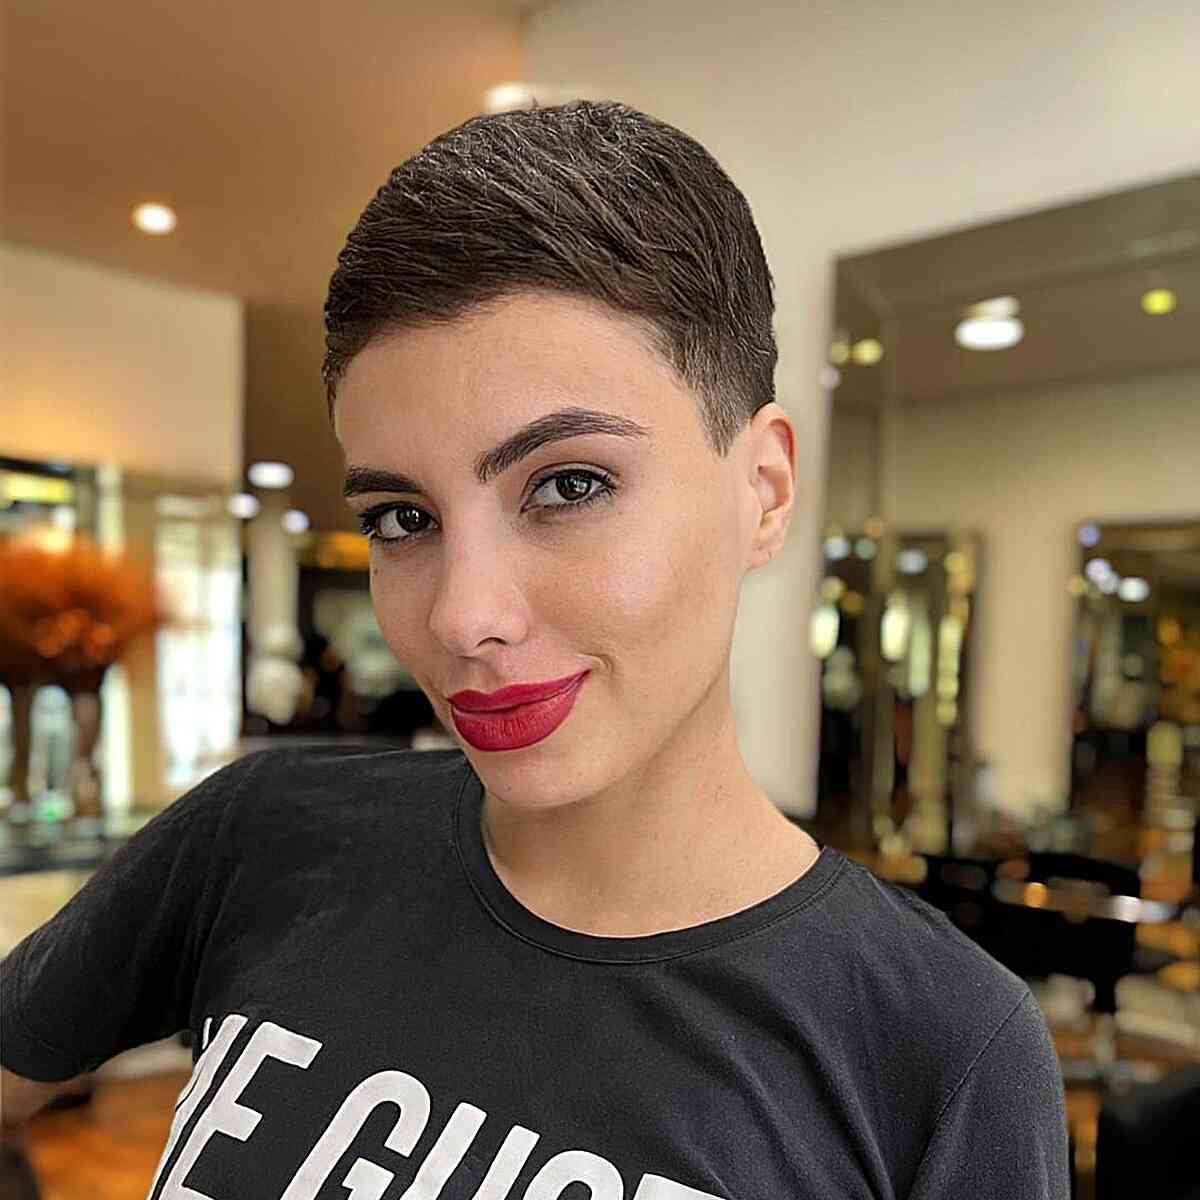 Very Short Micro Pixie Cut for women in their 30s with a large forehead